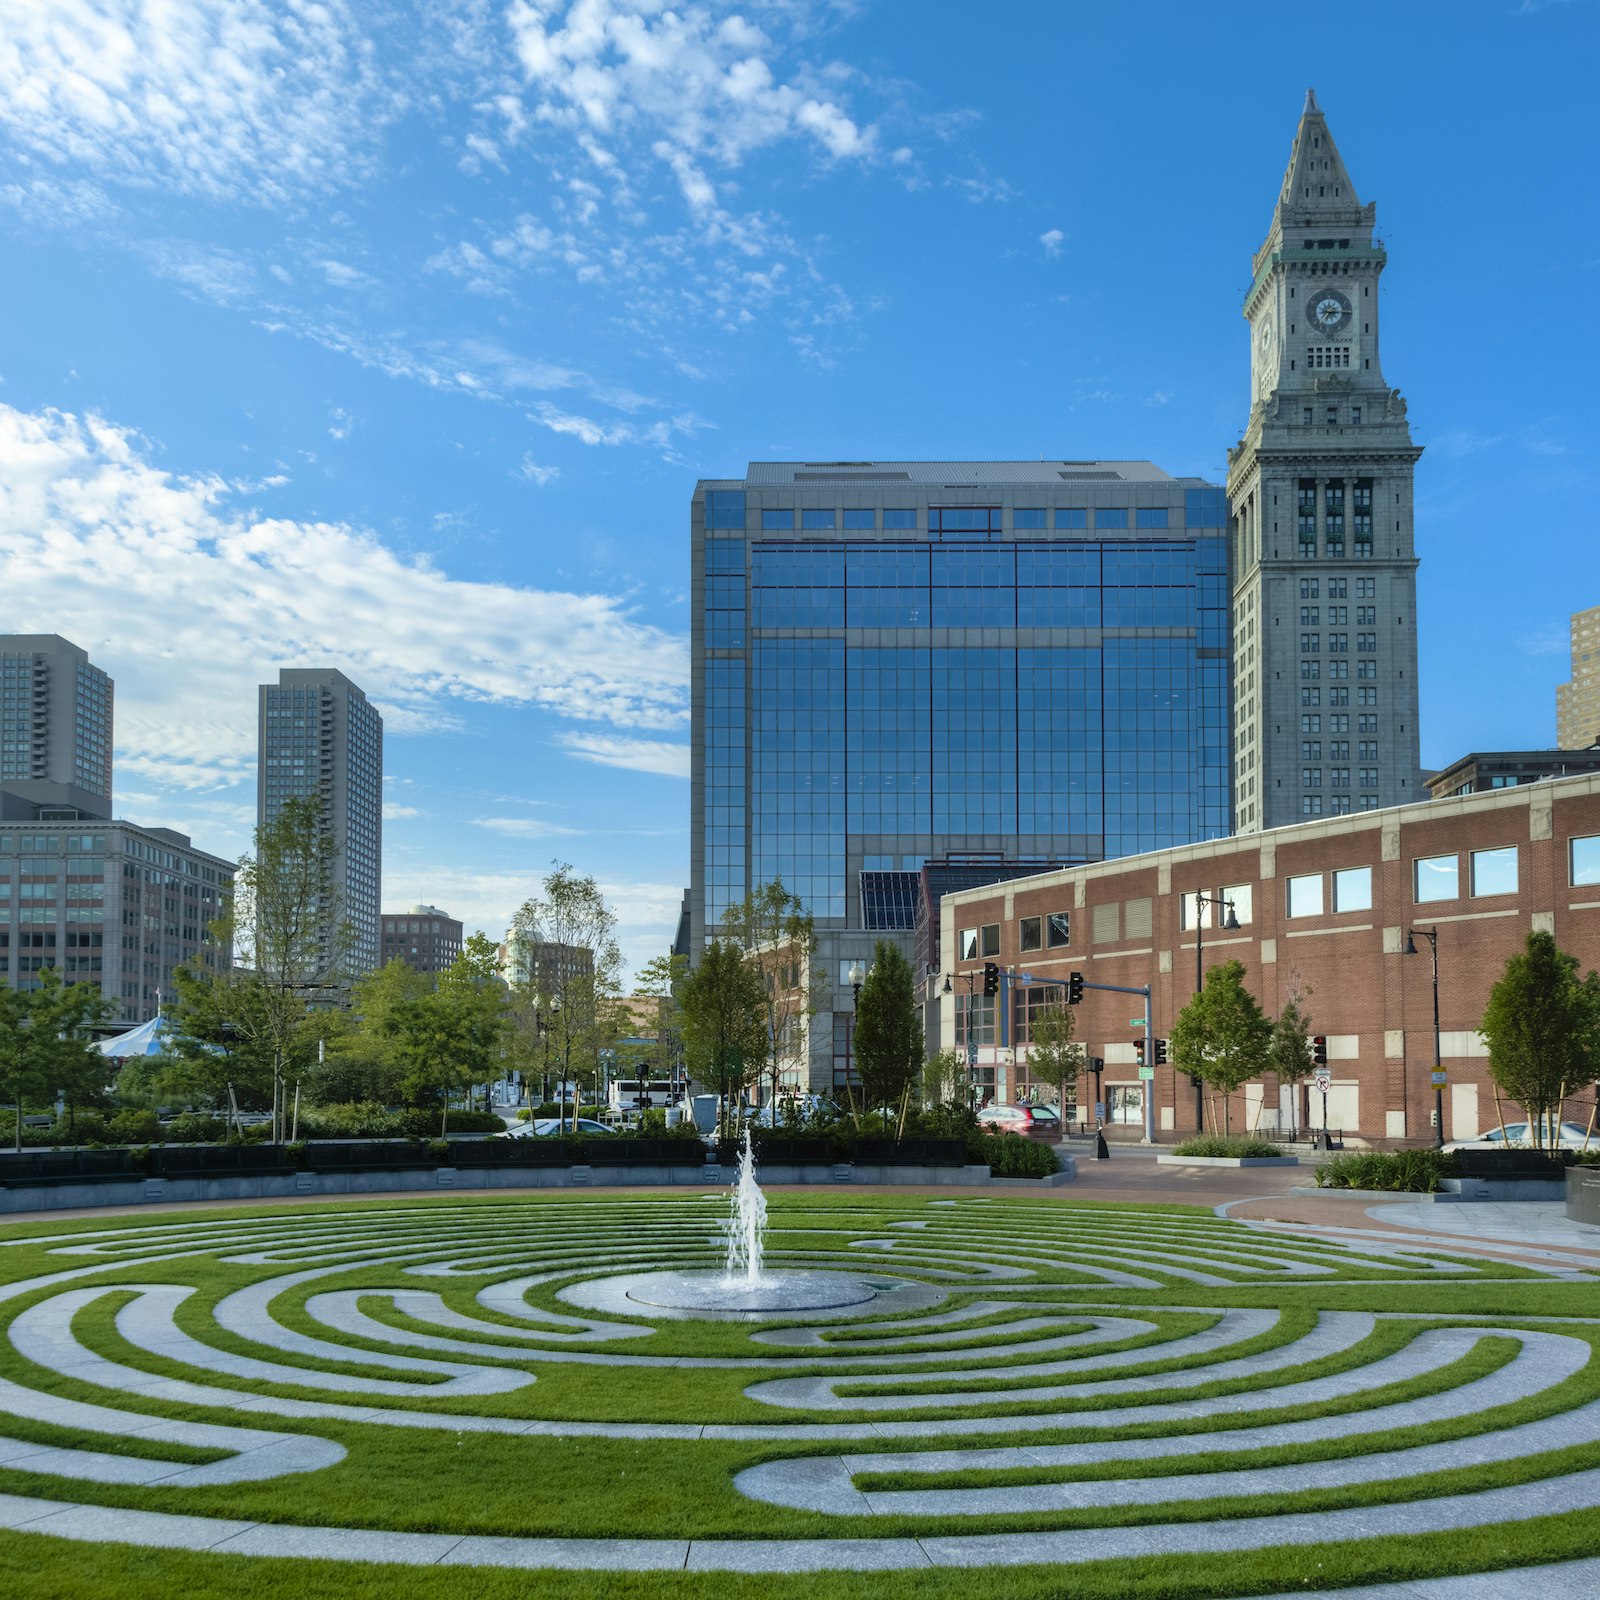 From the winding granite path of the labyrinth in the lawn of the Rose Fitzgerald Kennedy Greenway, the Boston Clock Tower stands tall among other tall buildings along the skyline.